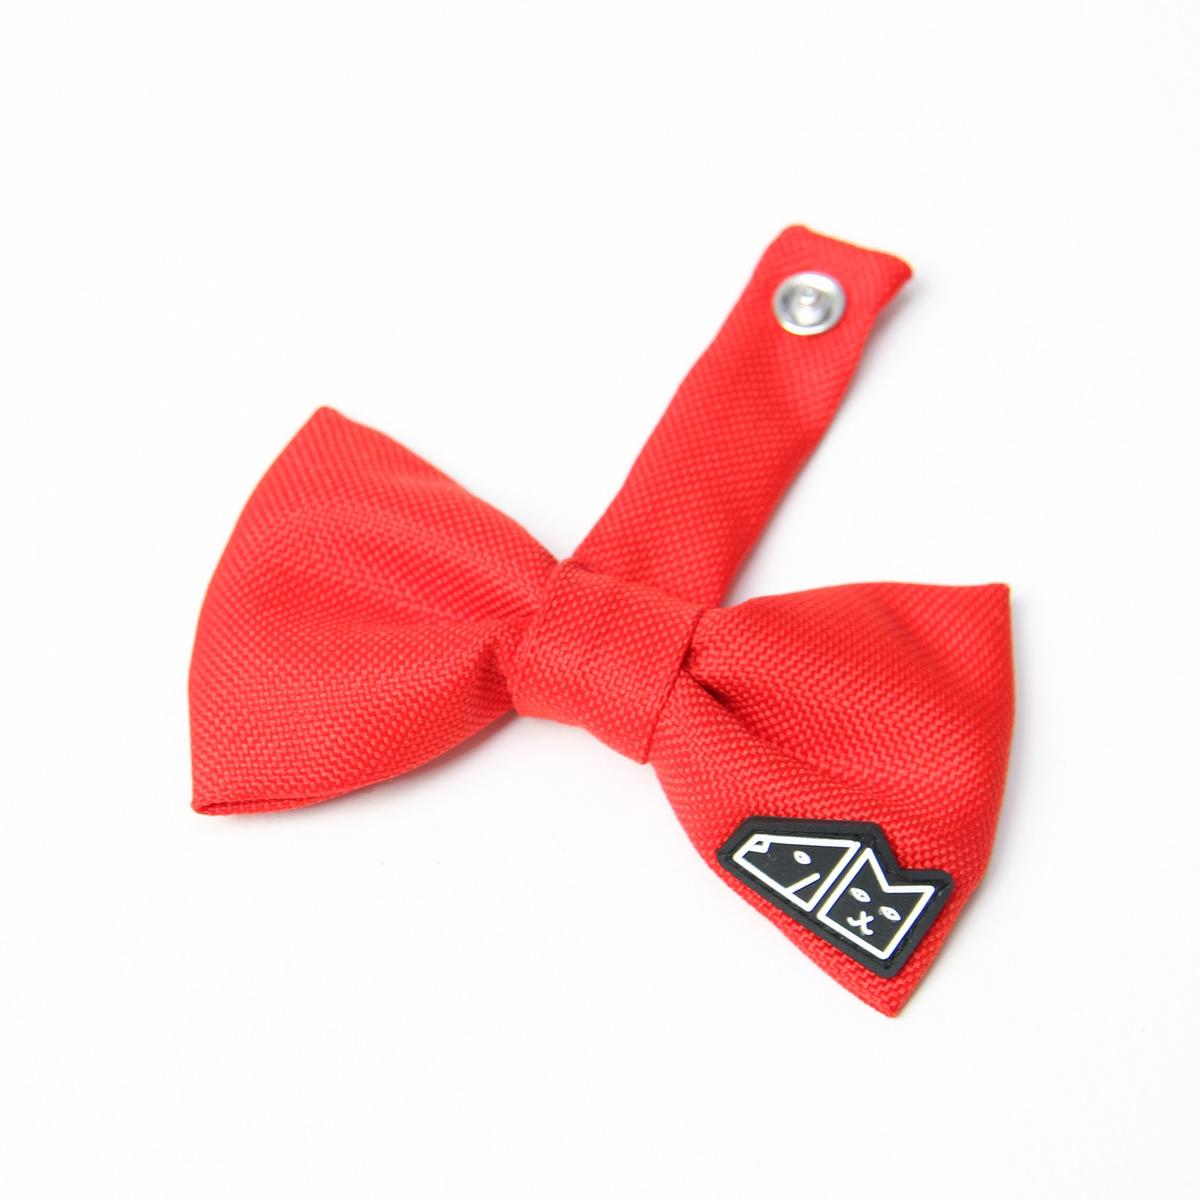 Bow tie "Red as a beet"